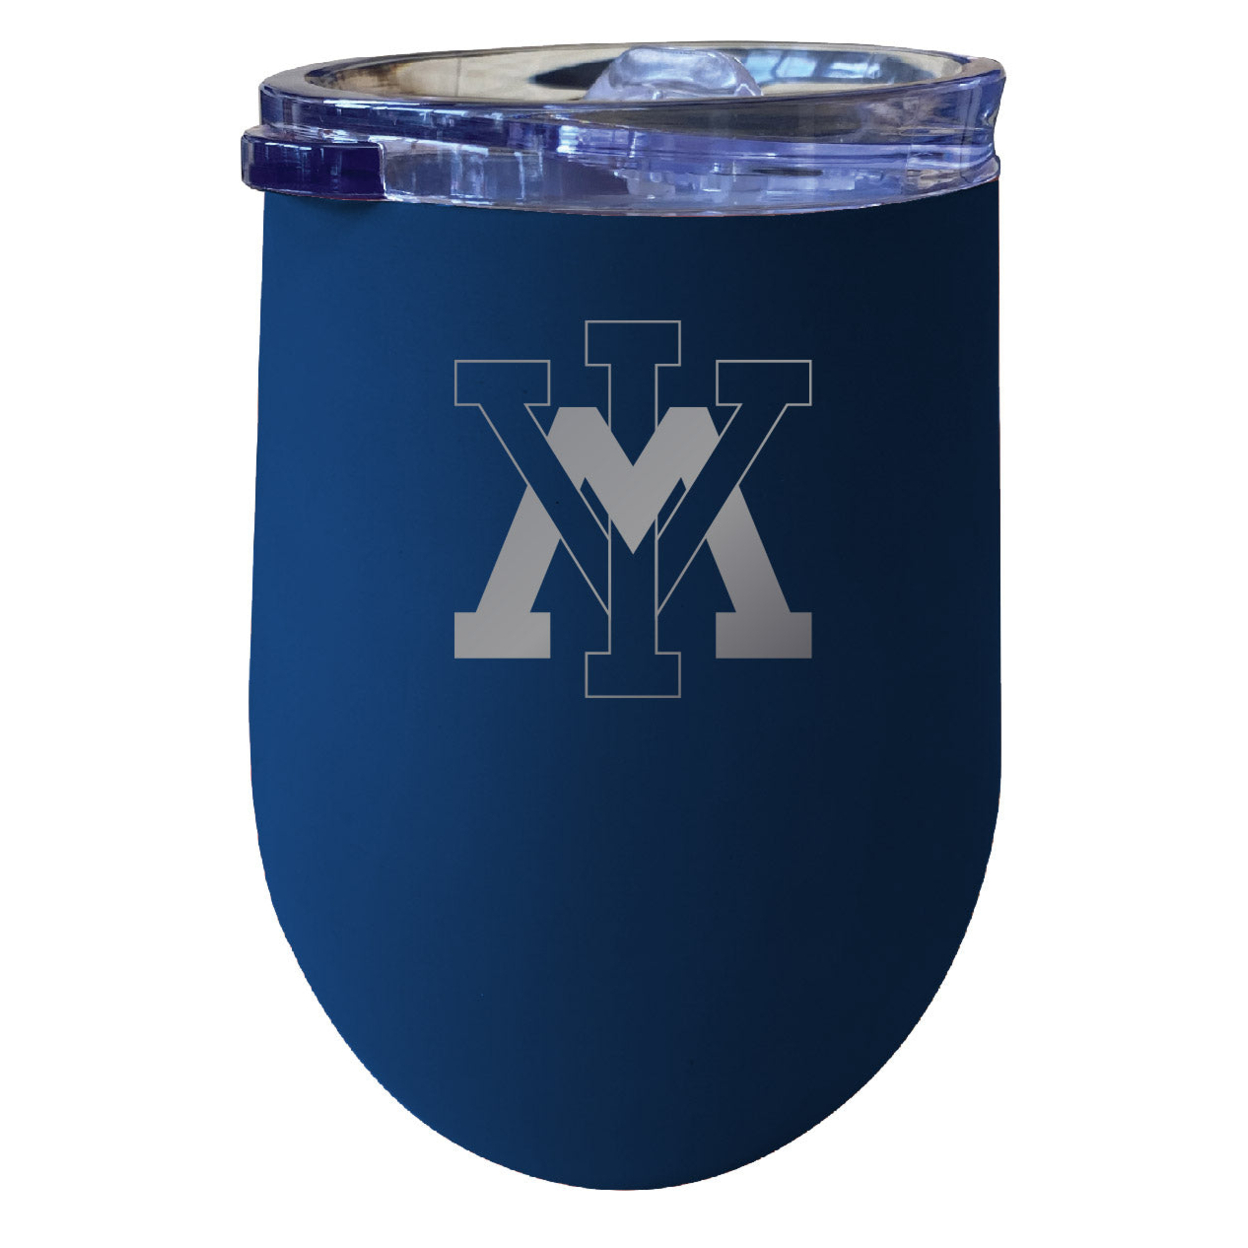 VMI Keydets 12 Oz Etched Insulated Wine Stainless Steel Tumbler - Choose Your Color - Navy